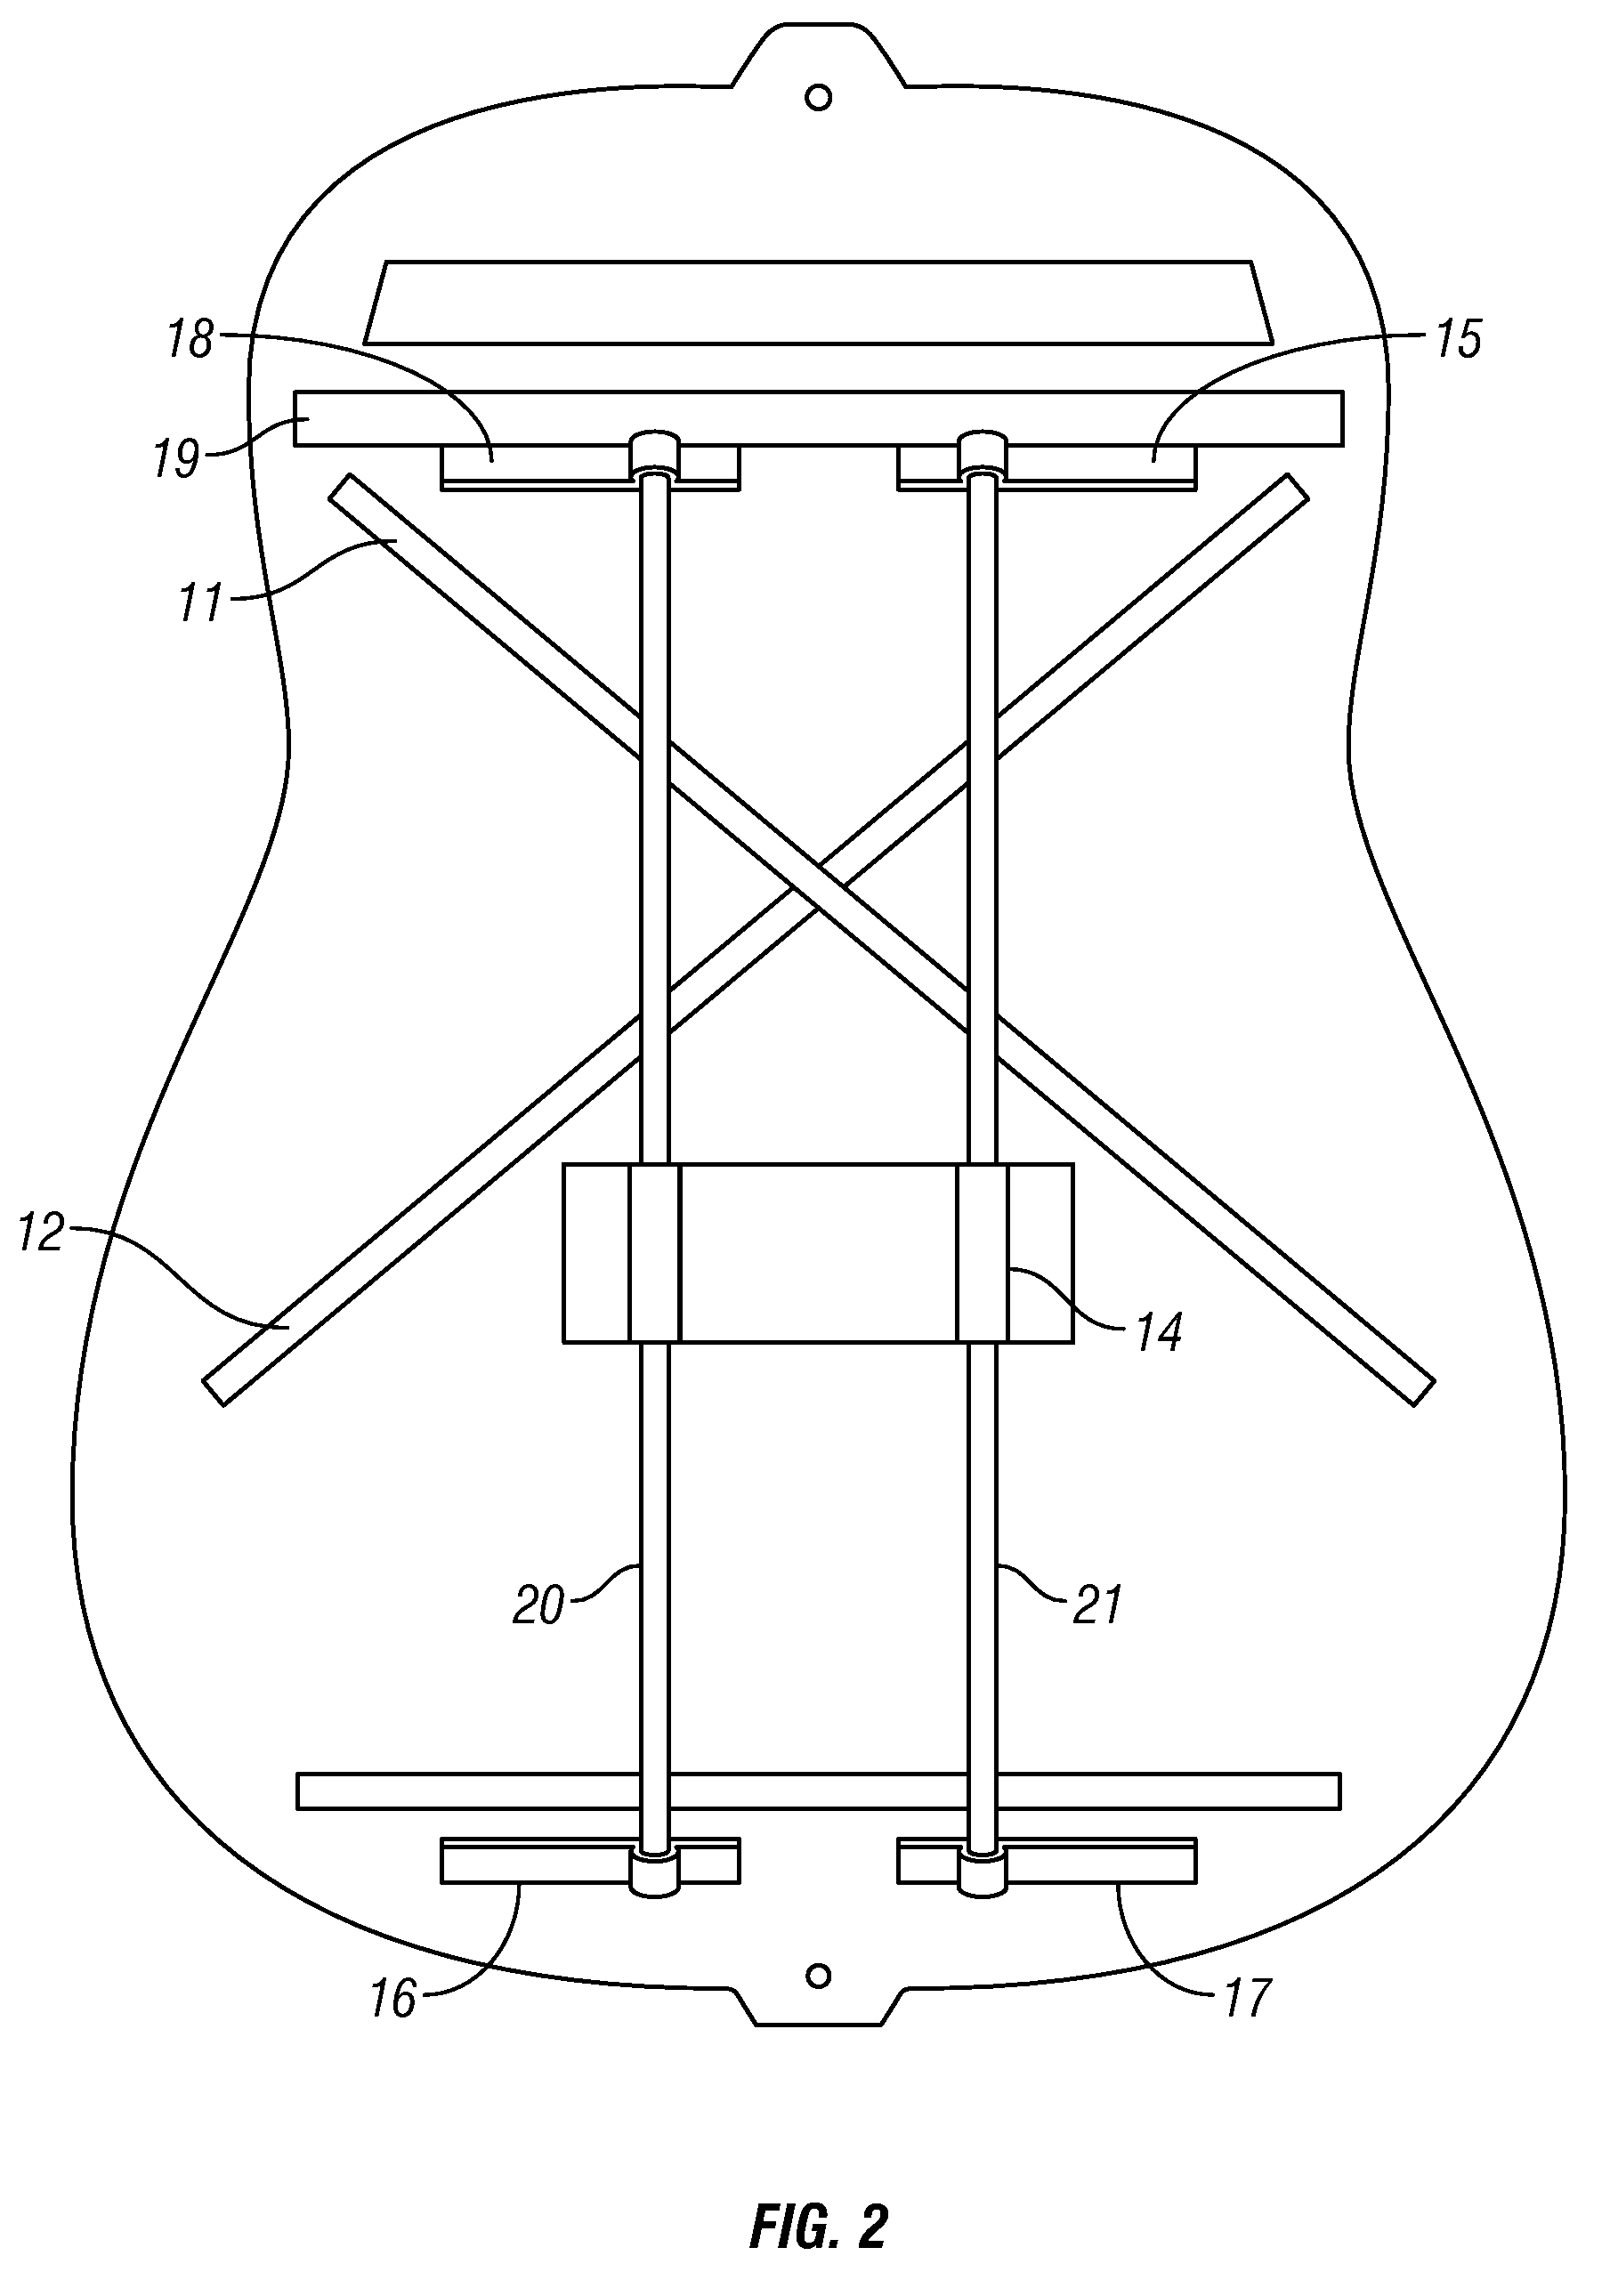 Suspended Bracing System for Acoustic Musical Instruments